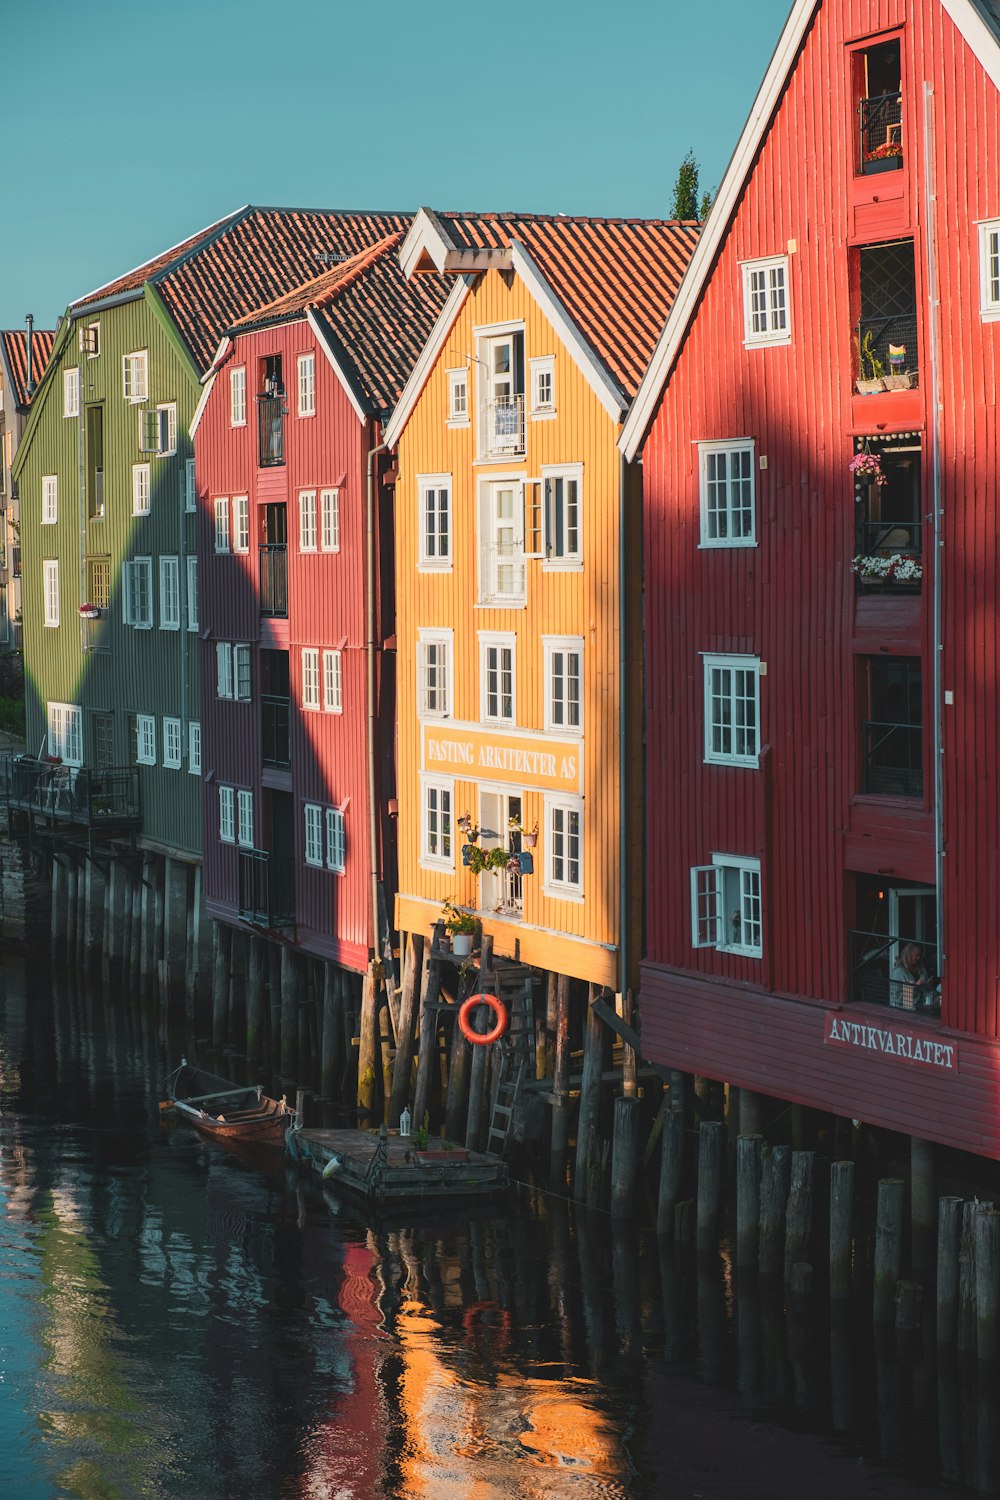 a row of houses sitting next to a body of water